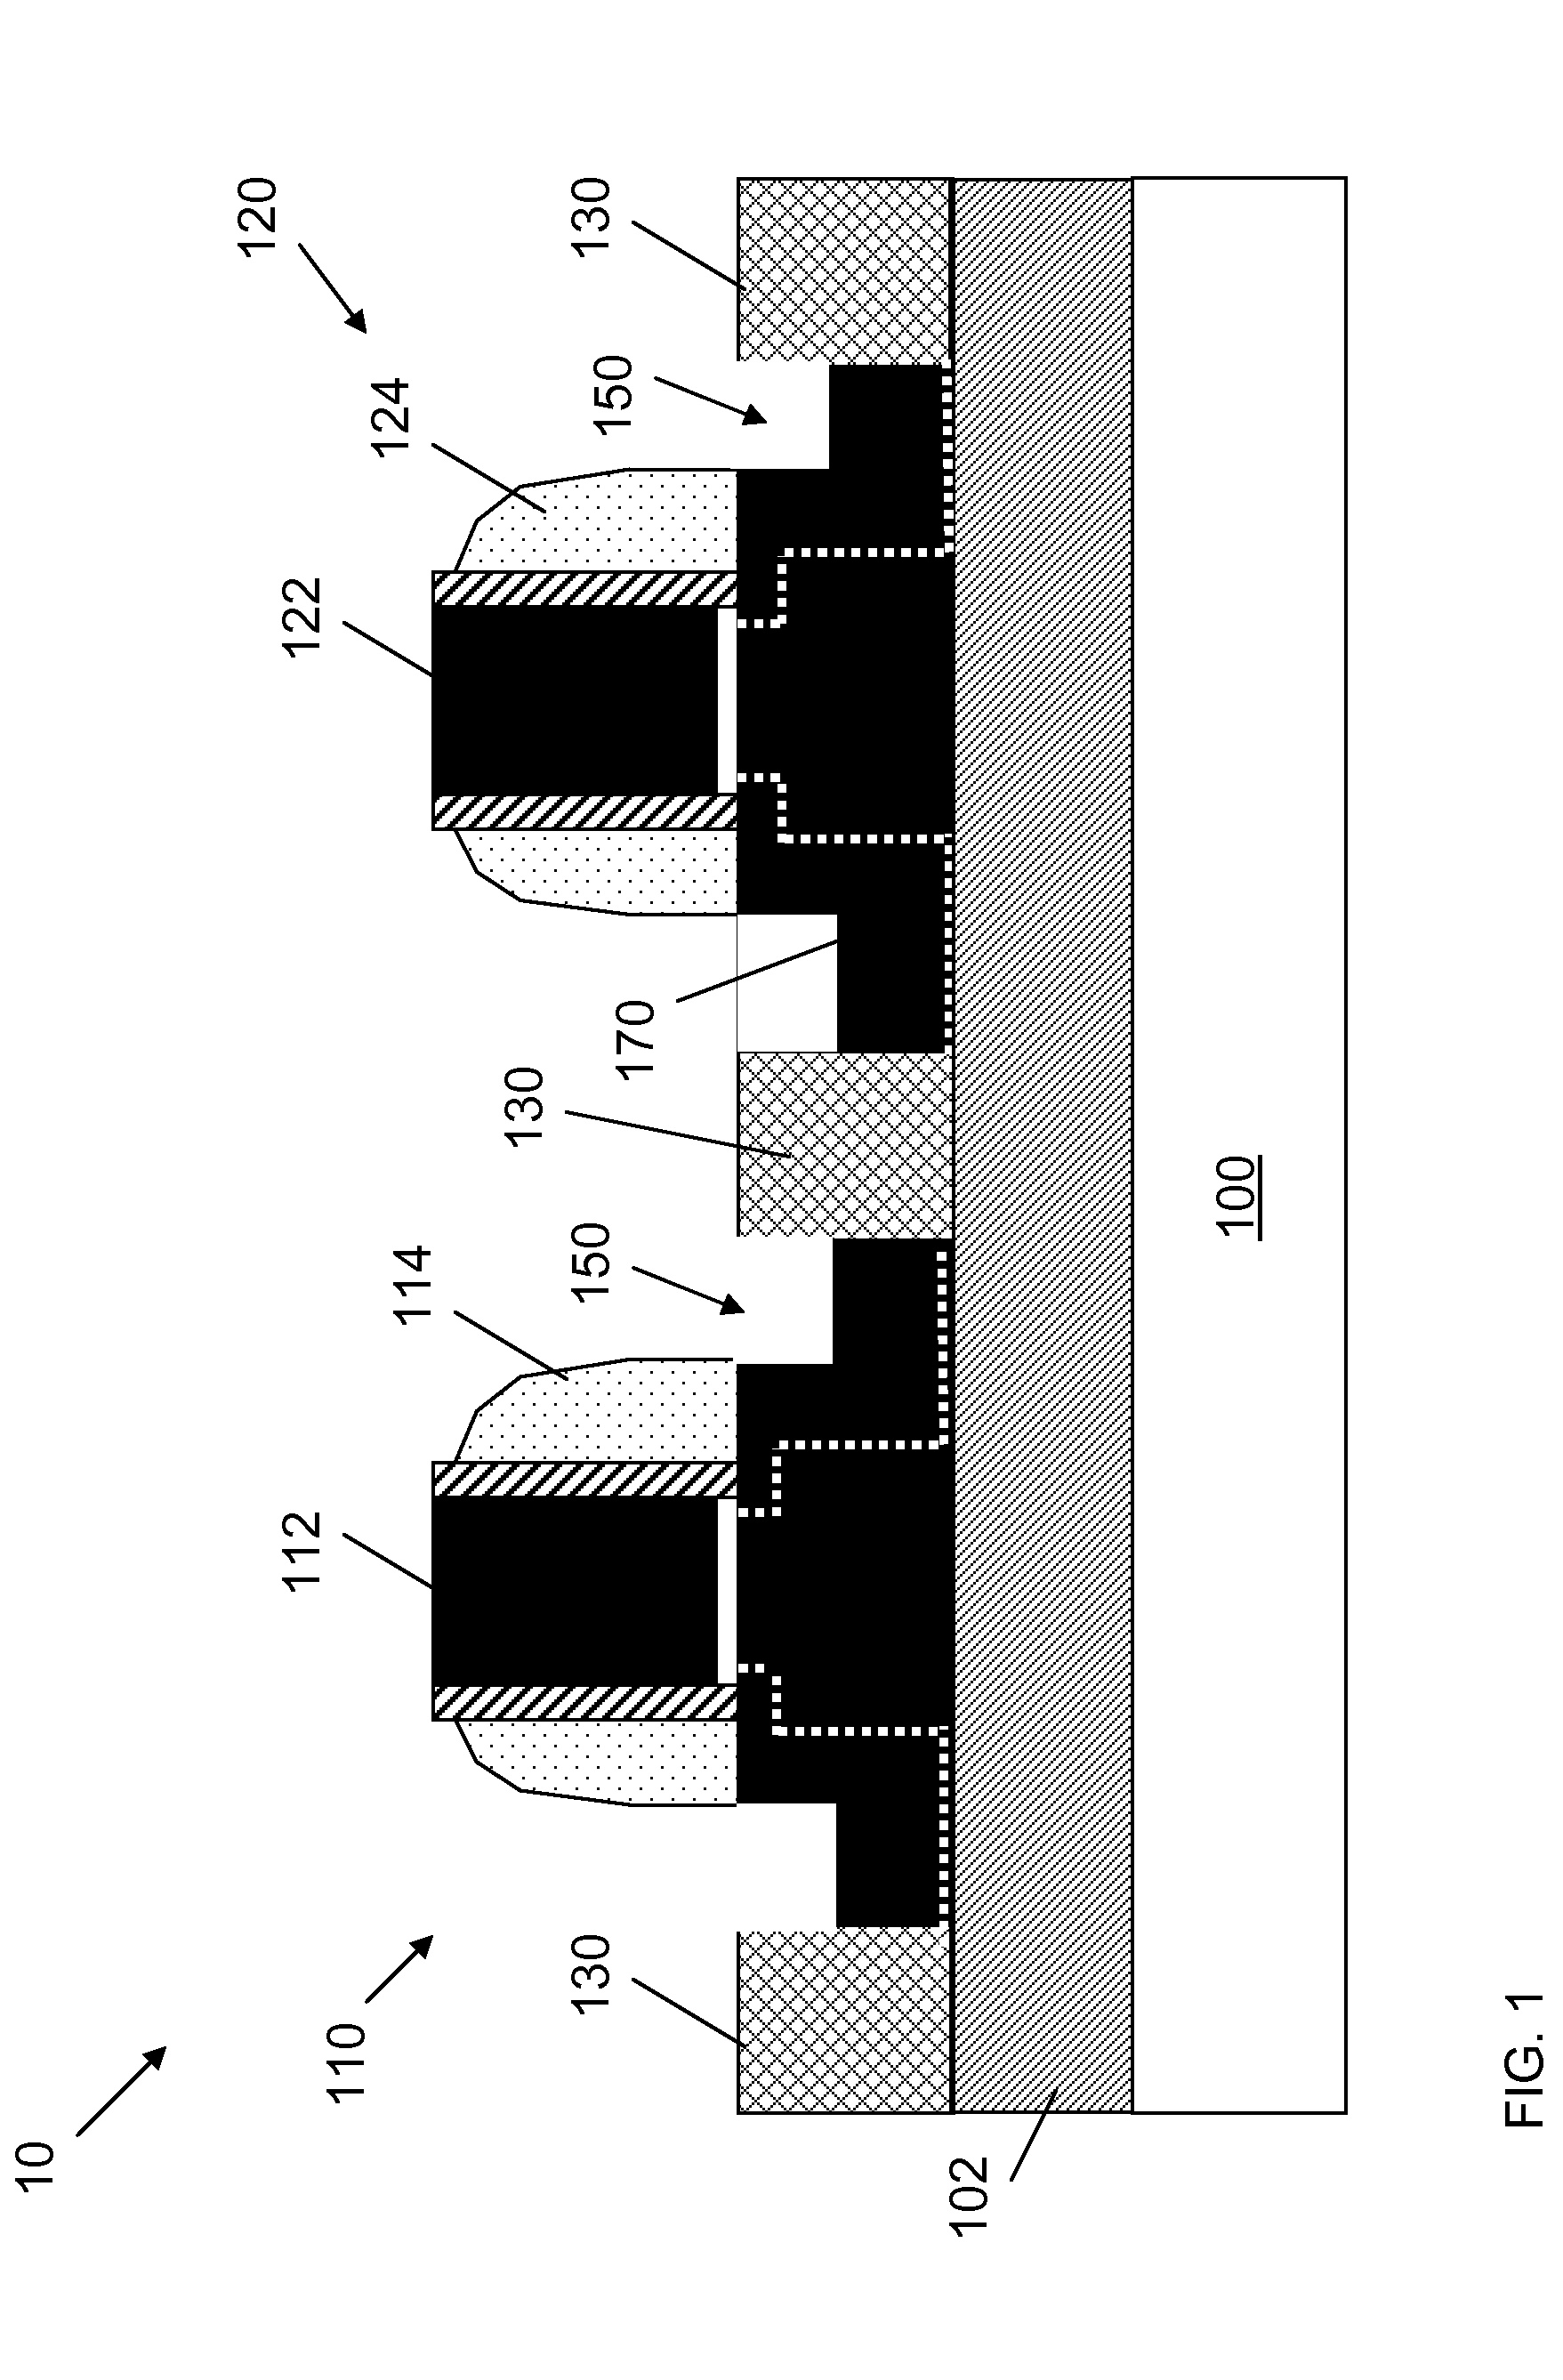 Inducing stress in CMOS device